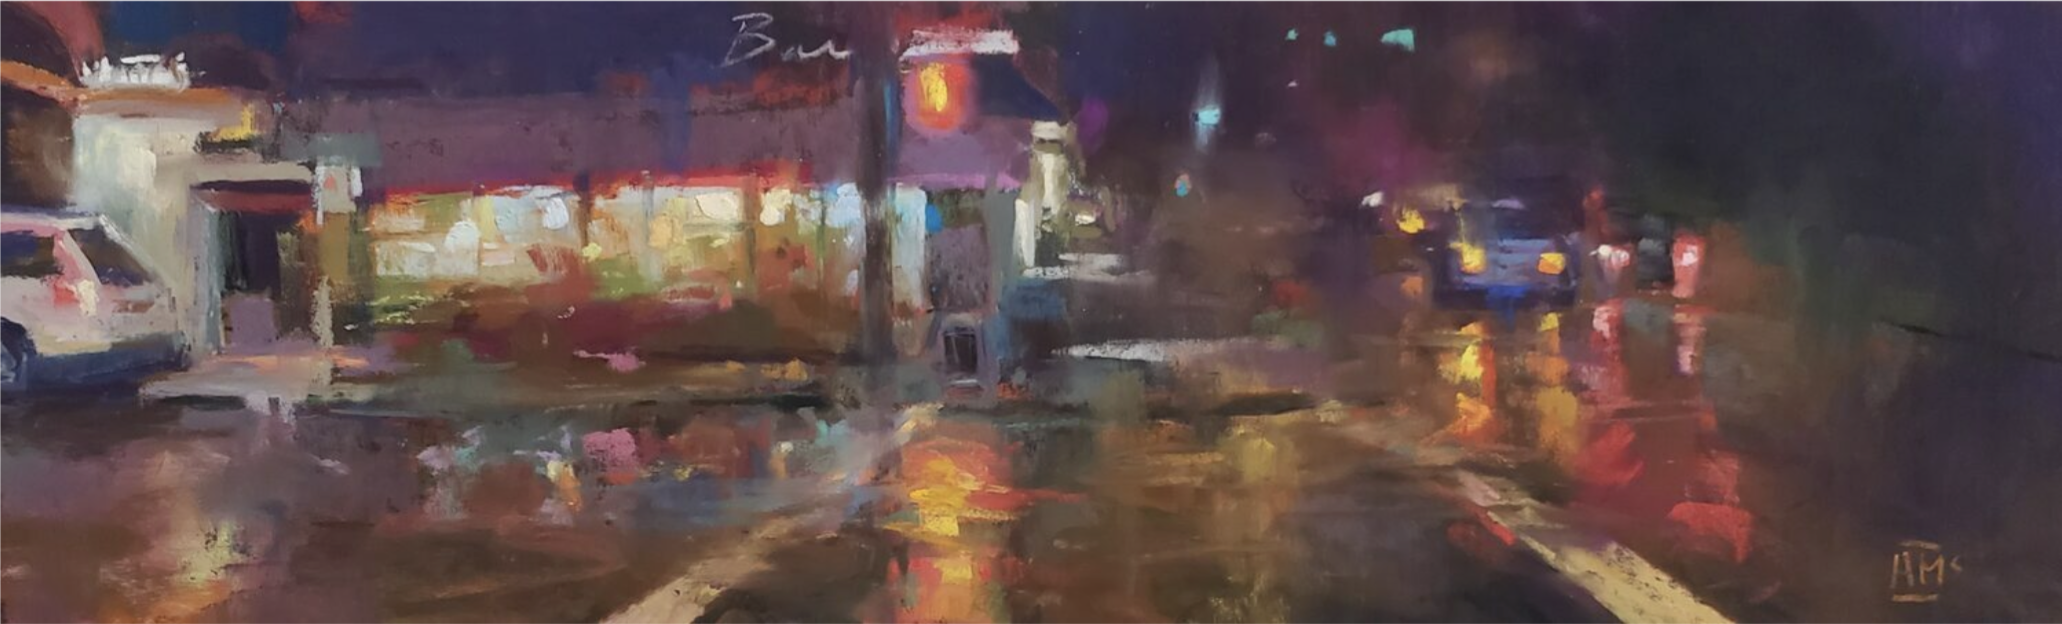 Warmth in Winter: Andrew McDermott, "Dining out at Bara41," pastel, 5 1/2 x 17 in. First Place - Warmth in Winter